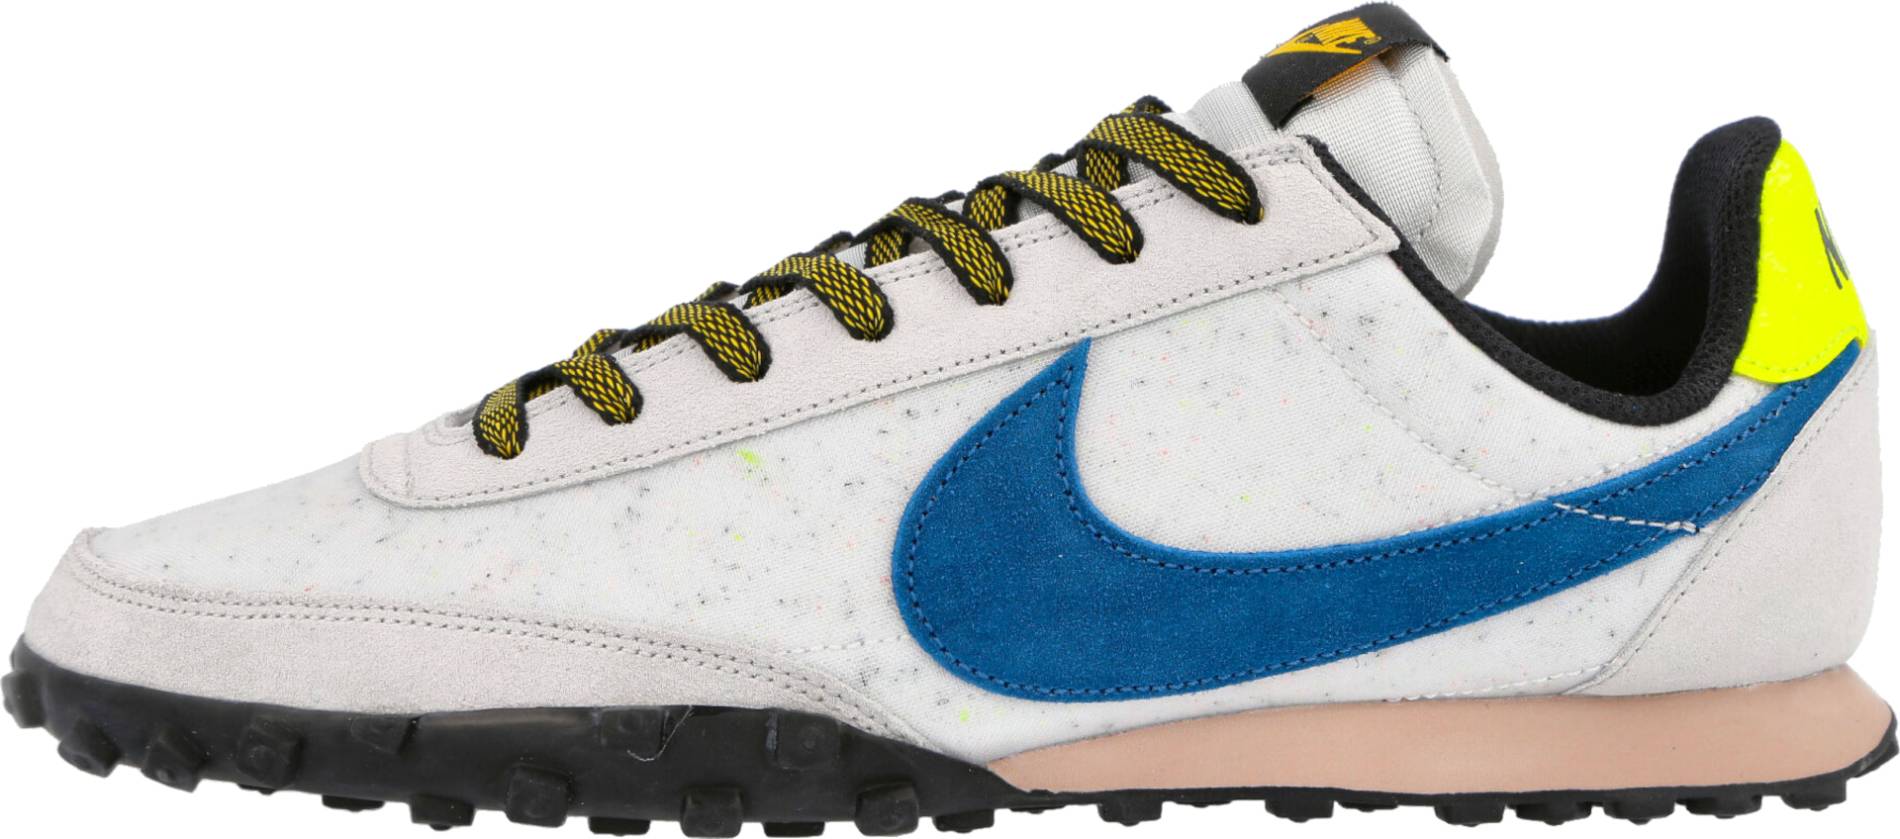 Nike zappos nike daybreak Waffle Racer sneakers in 5 colors (only $30) | RunRepeat